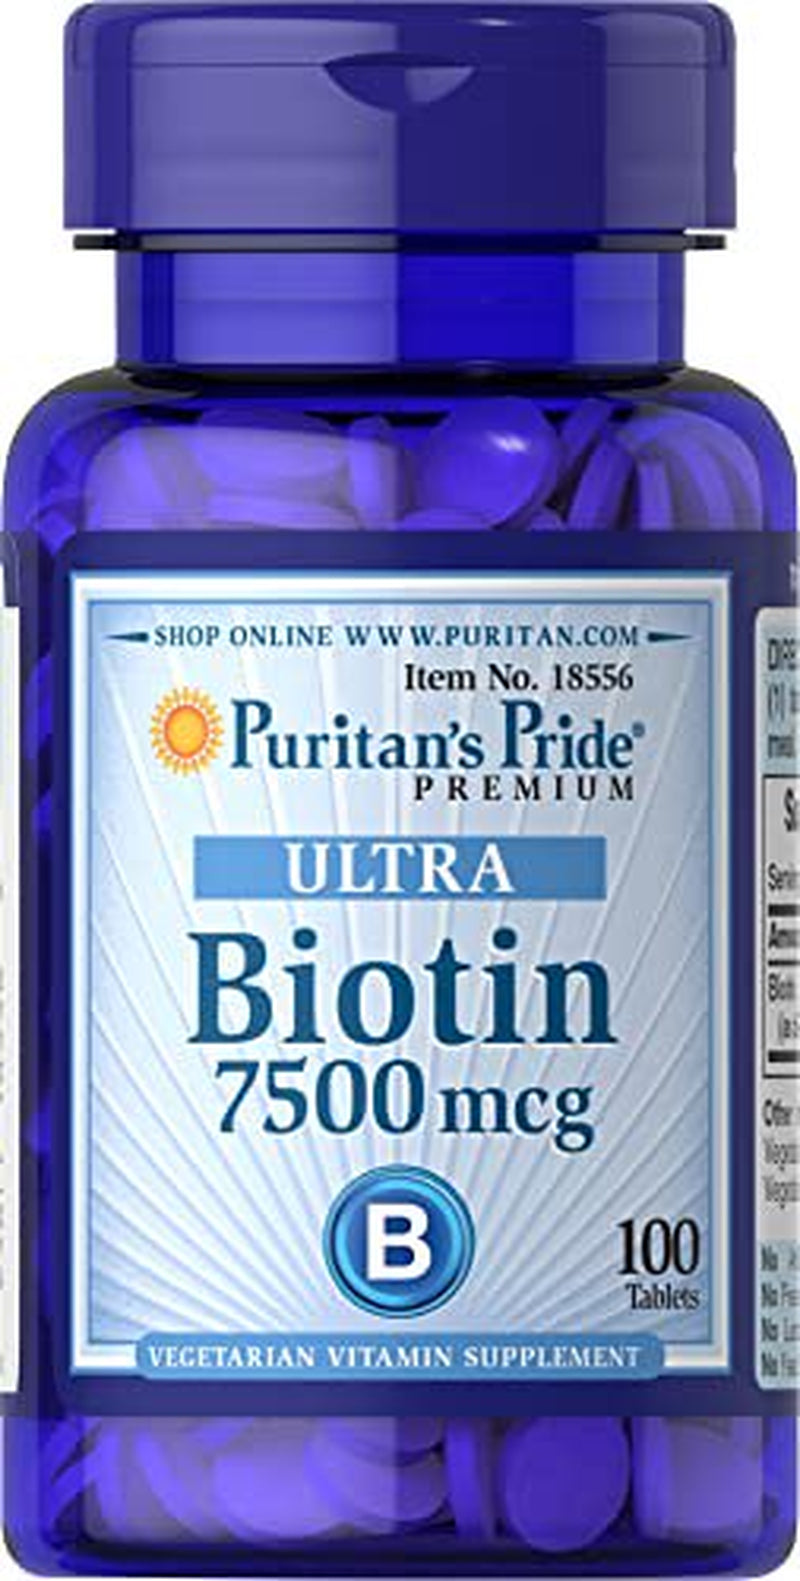 Puritan'S Pride Biotin 7500 Mcg, Healthy Hair Support, 100 Count, 100 Count (Pack of 1)